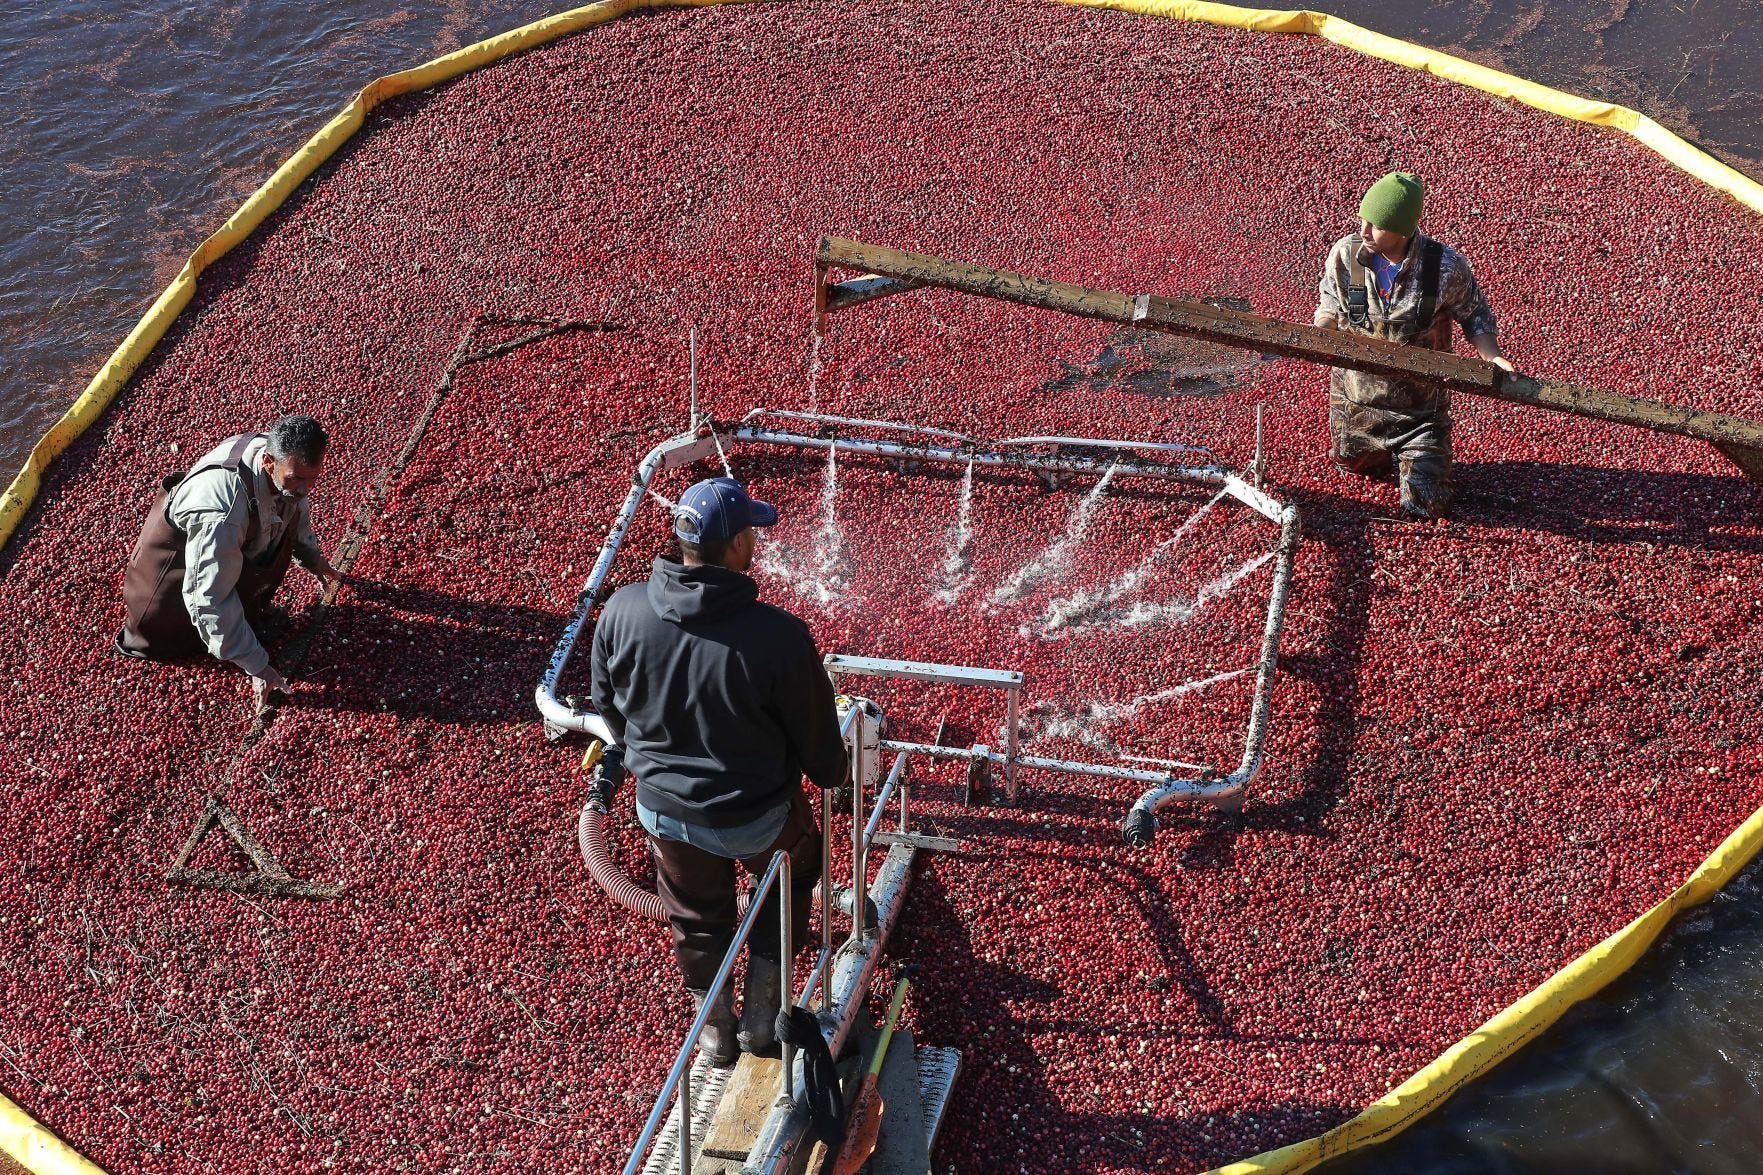 In this Oct. 17, 2017 photo, Six Pine Island Cranberry Co. workers push floating berries into a bog-side cleaner in Chatsworth. Tractors drag a yellow boom around the bog to section it off for workers to harvest. The cleaner washes the berries, which are then transported by truck to the Ocean Spray receiving center. (Craig Matthews/The Press of Atlantic City via AP)